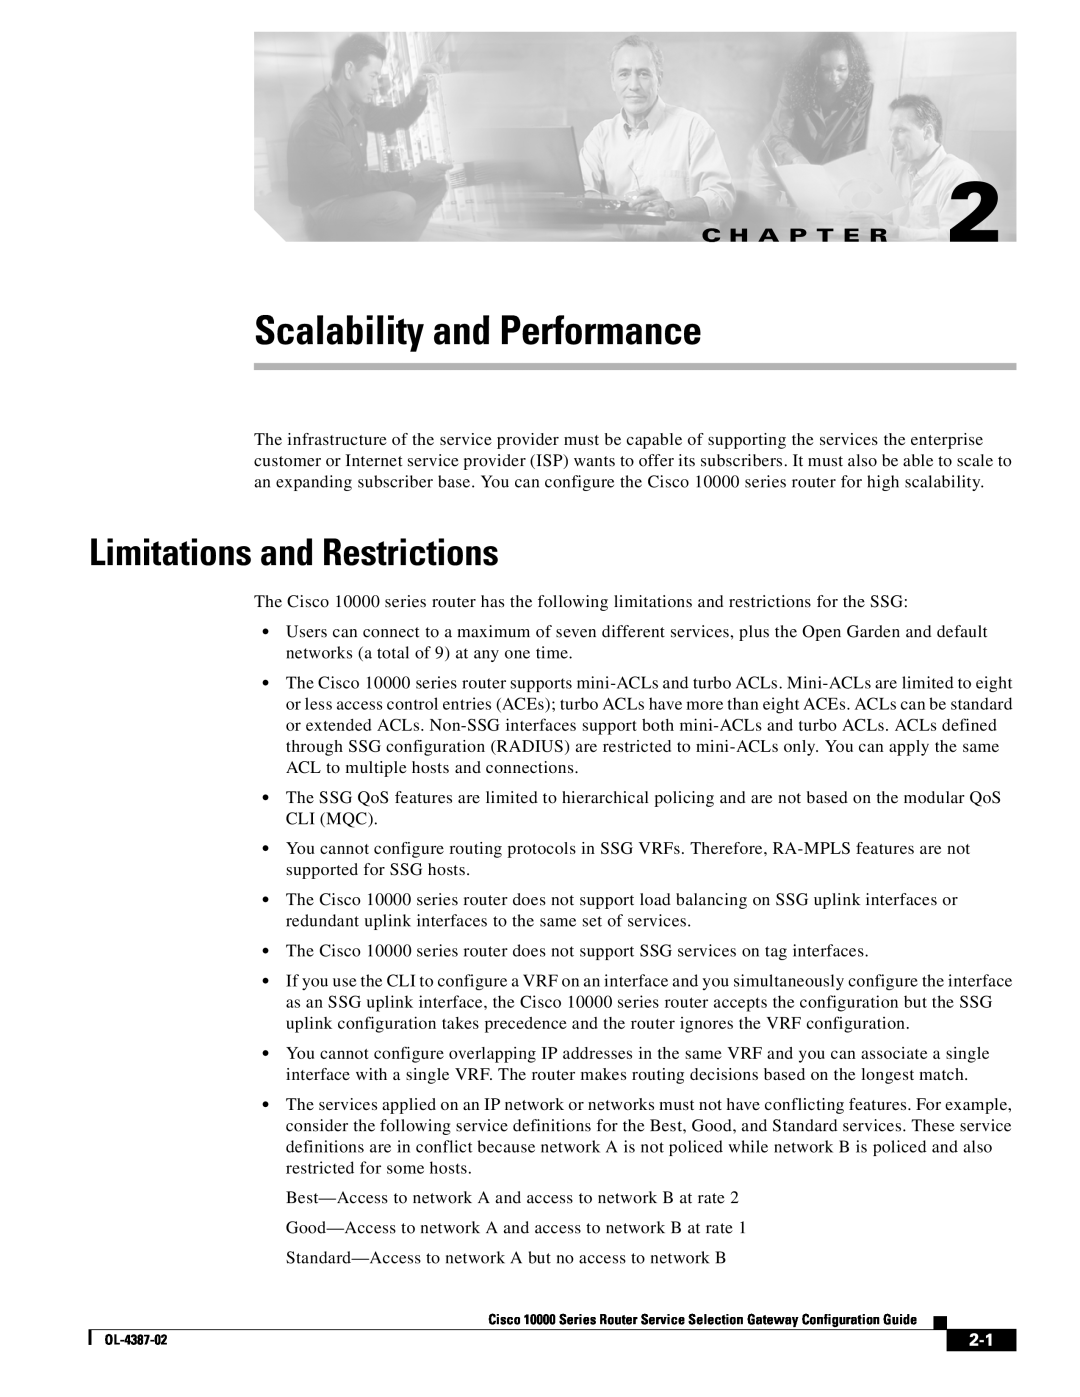 Cisco Systems OL-4387-02 manual Scalability and Performance, Limitations and Restrictions, C H A P T E R 